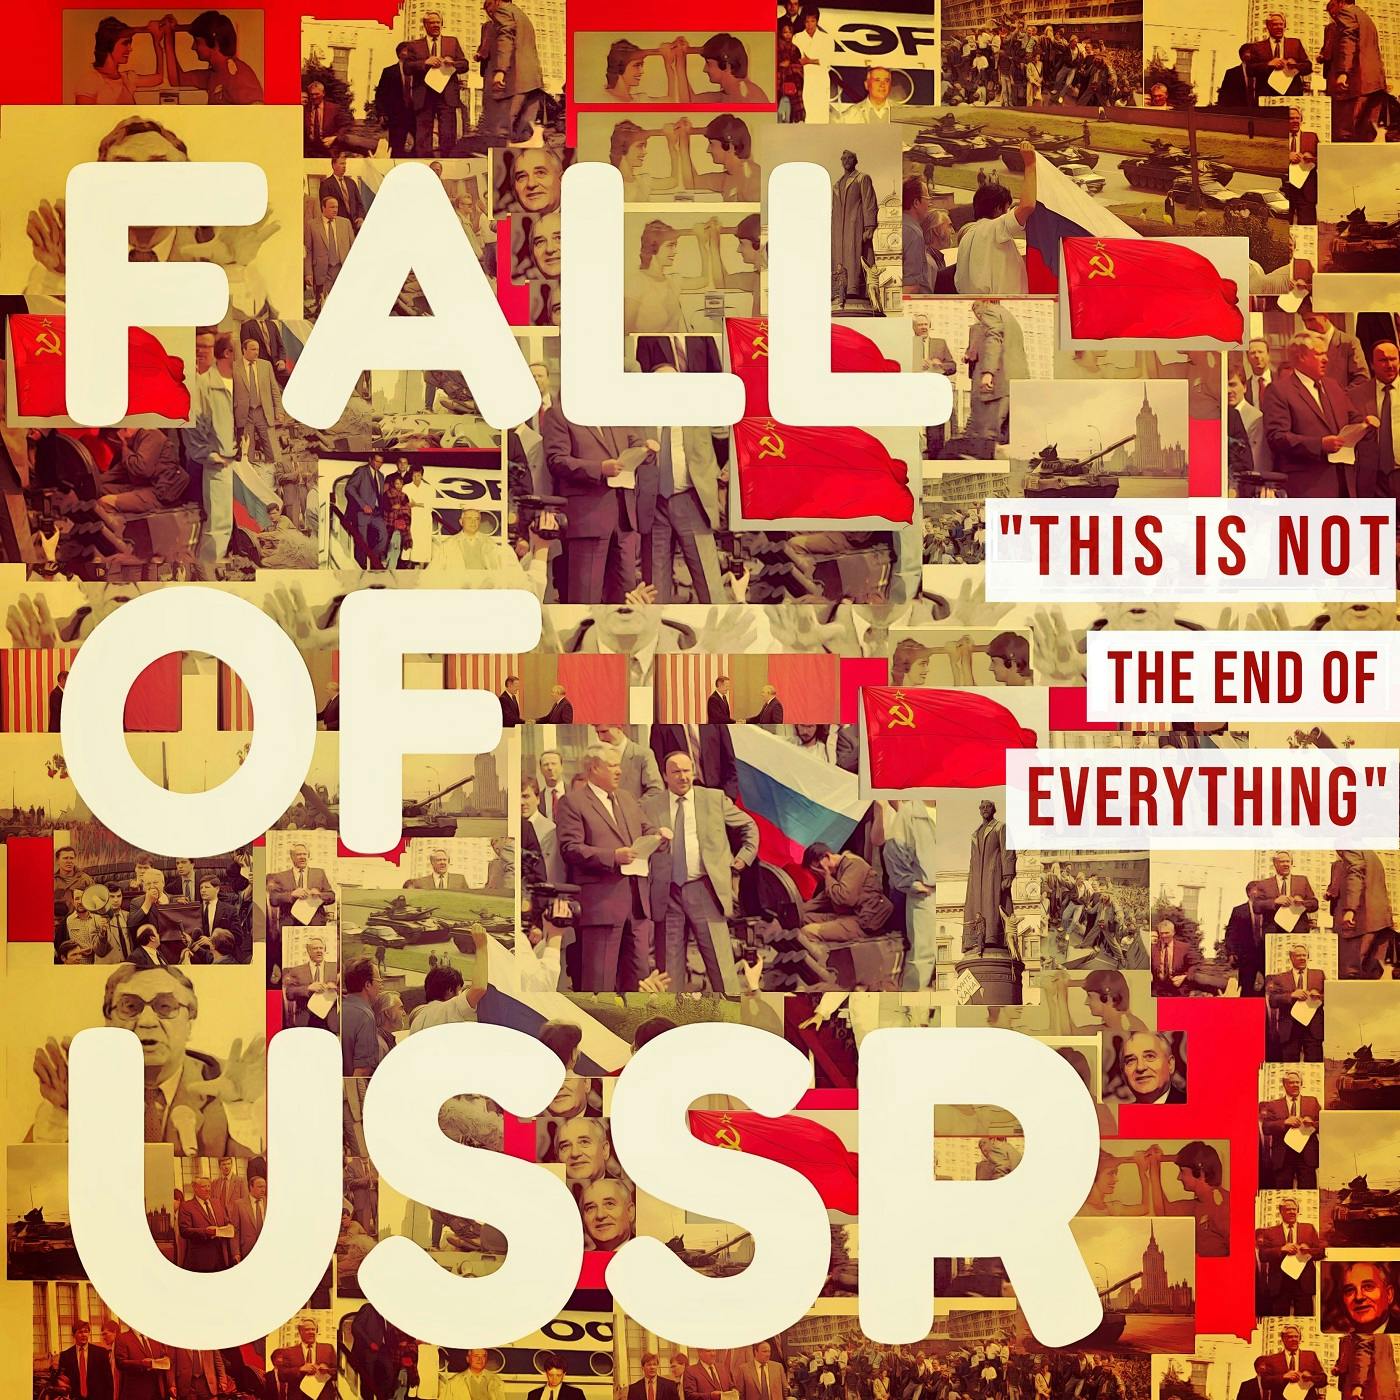 FALL OF USSR: Part 5 - I Cannot Forsake Principles!